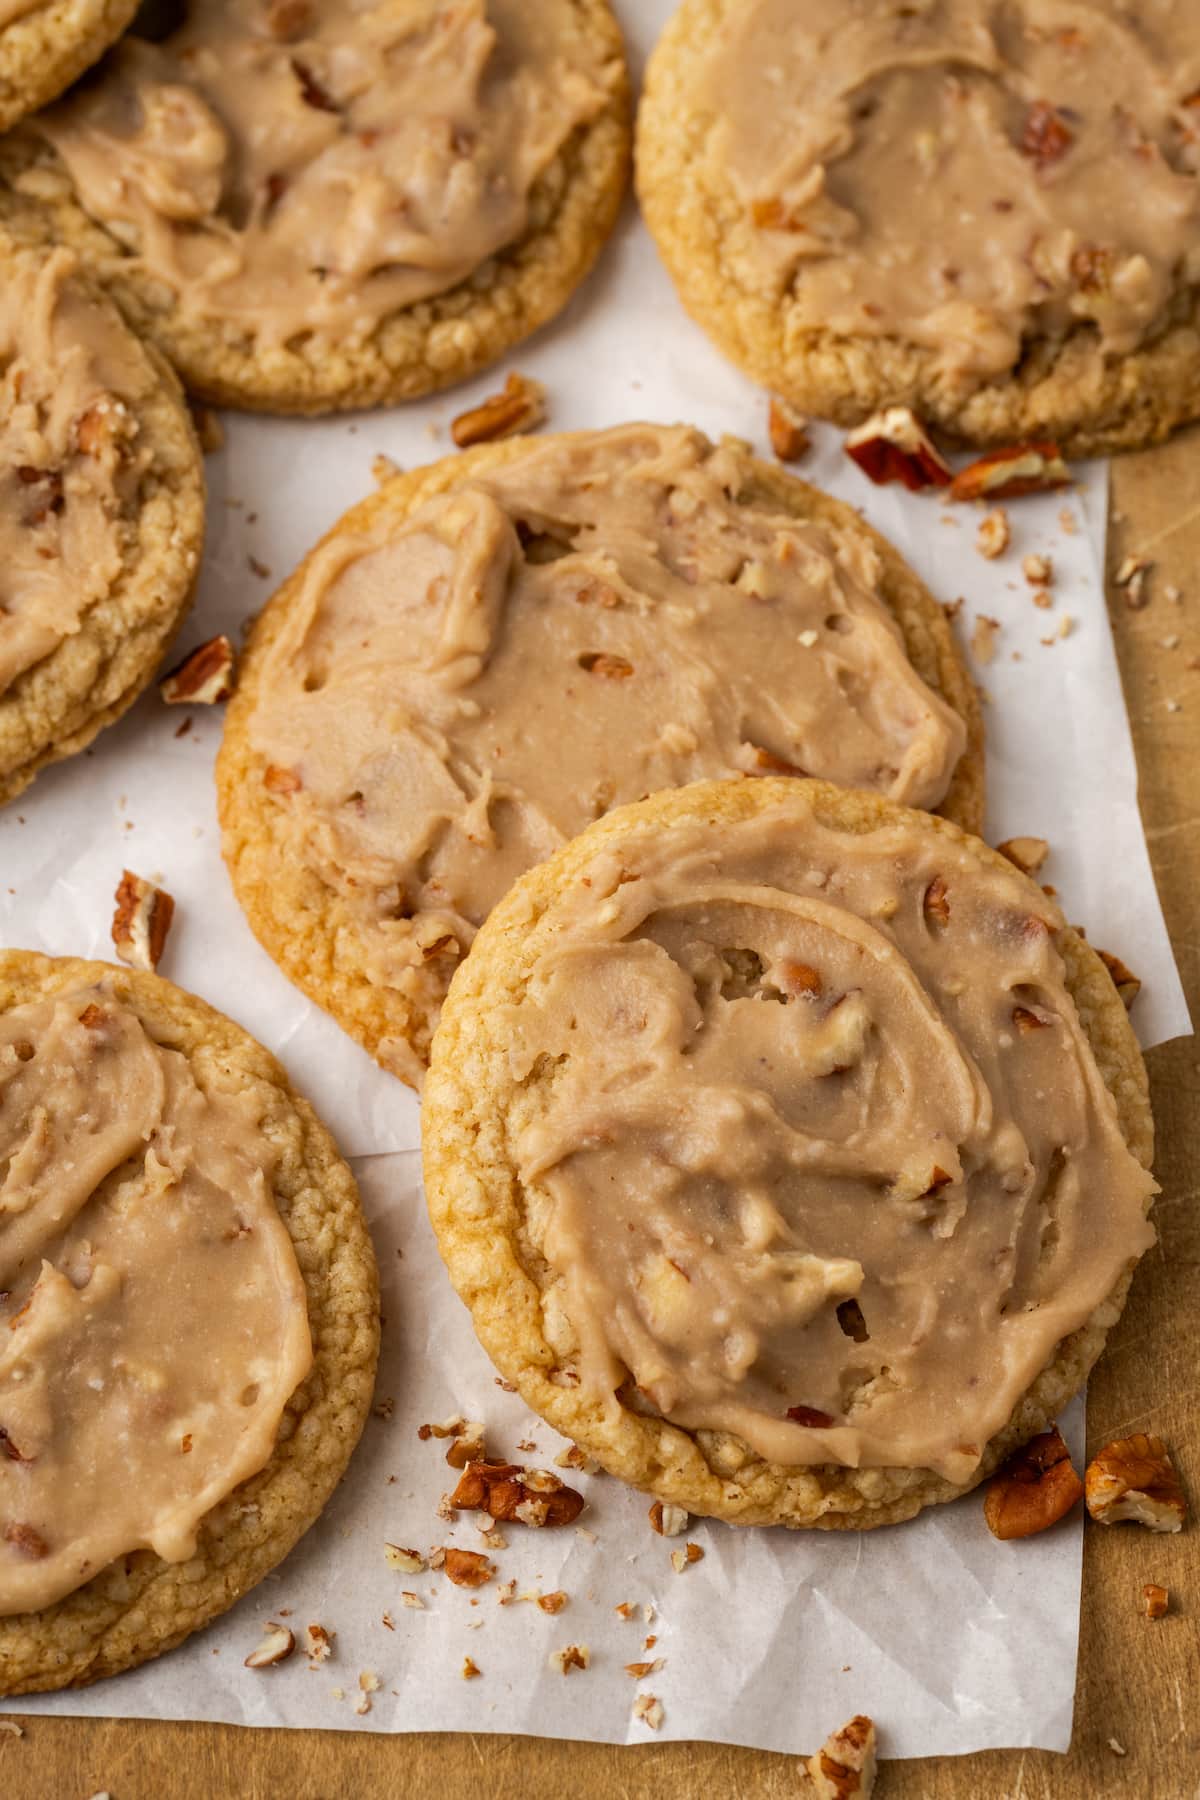 Pecan praline cookies on a parchment-lined wooden board.